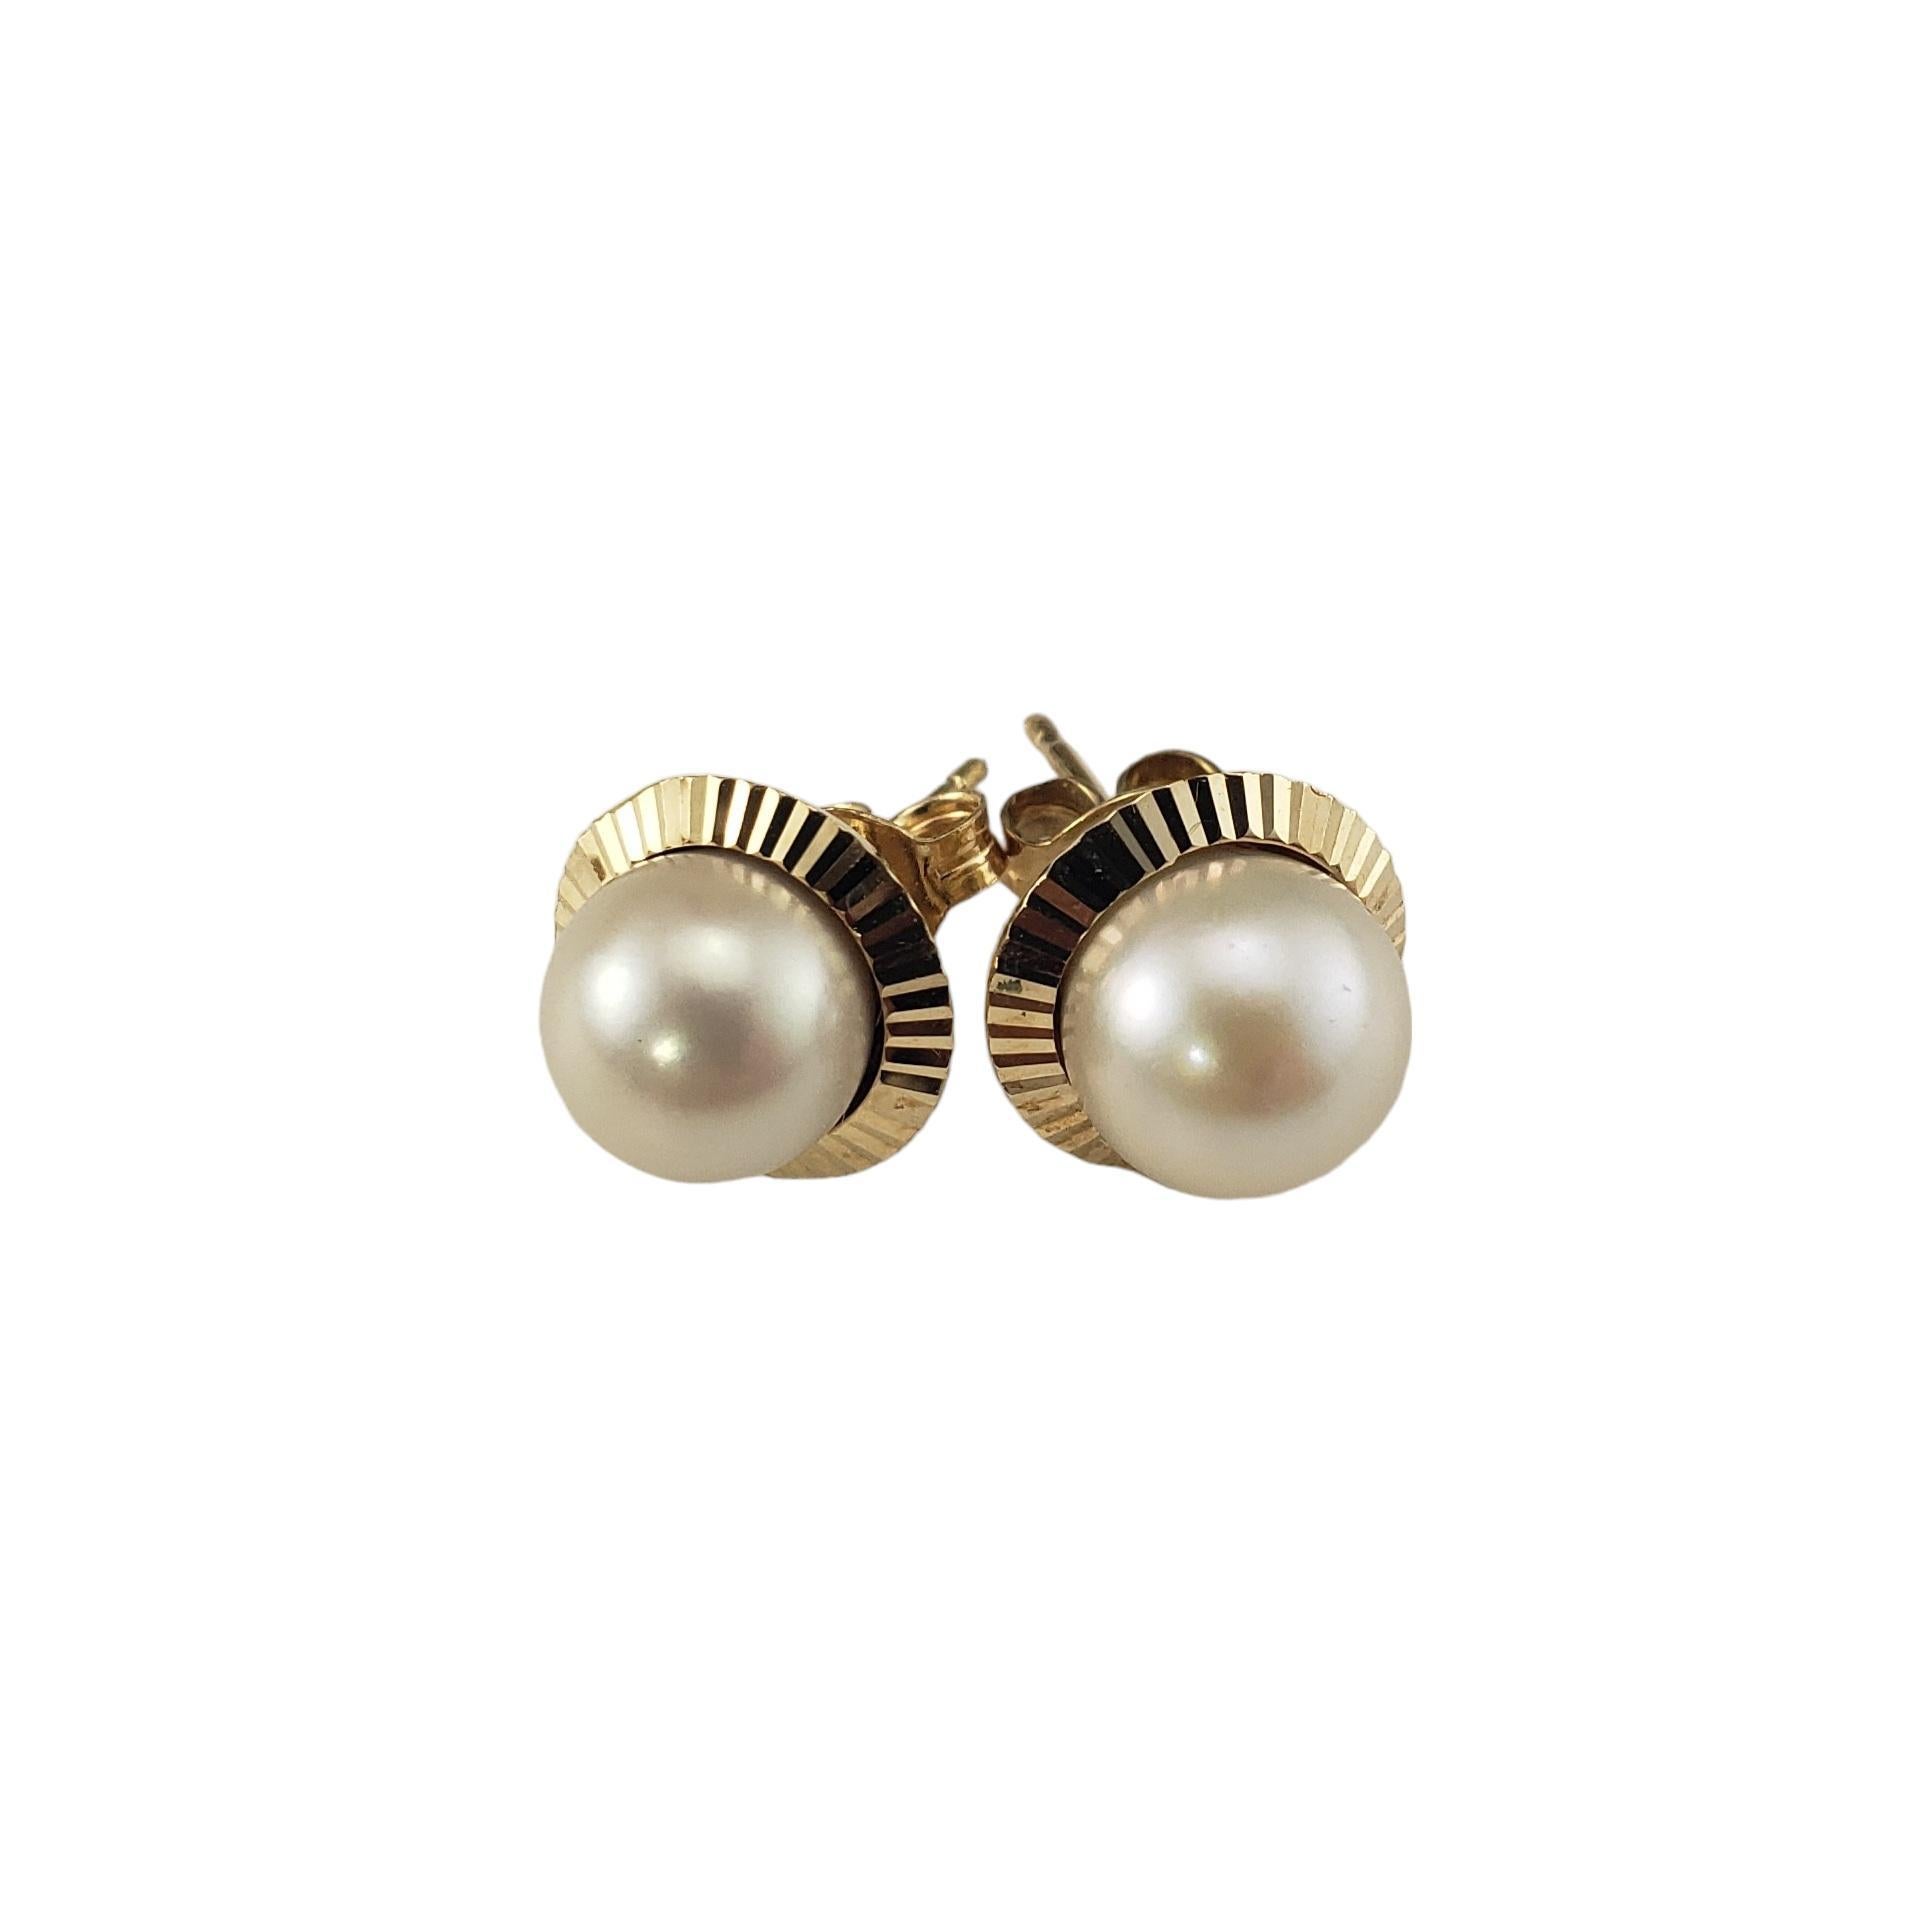 Vintage 14 Karat Yellow Gold Pearl Earrings

These elegant stud earrings each feature one round white pearl (7 mm) set in beautifully detailed 14K yellow gold. 

 Push back closures.

Size: 10 mm

Stamped: 14K

Weight: 1.3 dwt./ 1.9 gr.

Very good